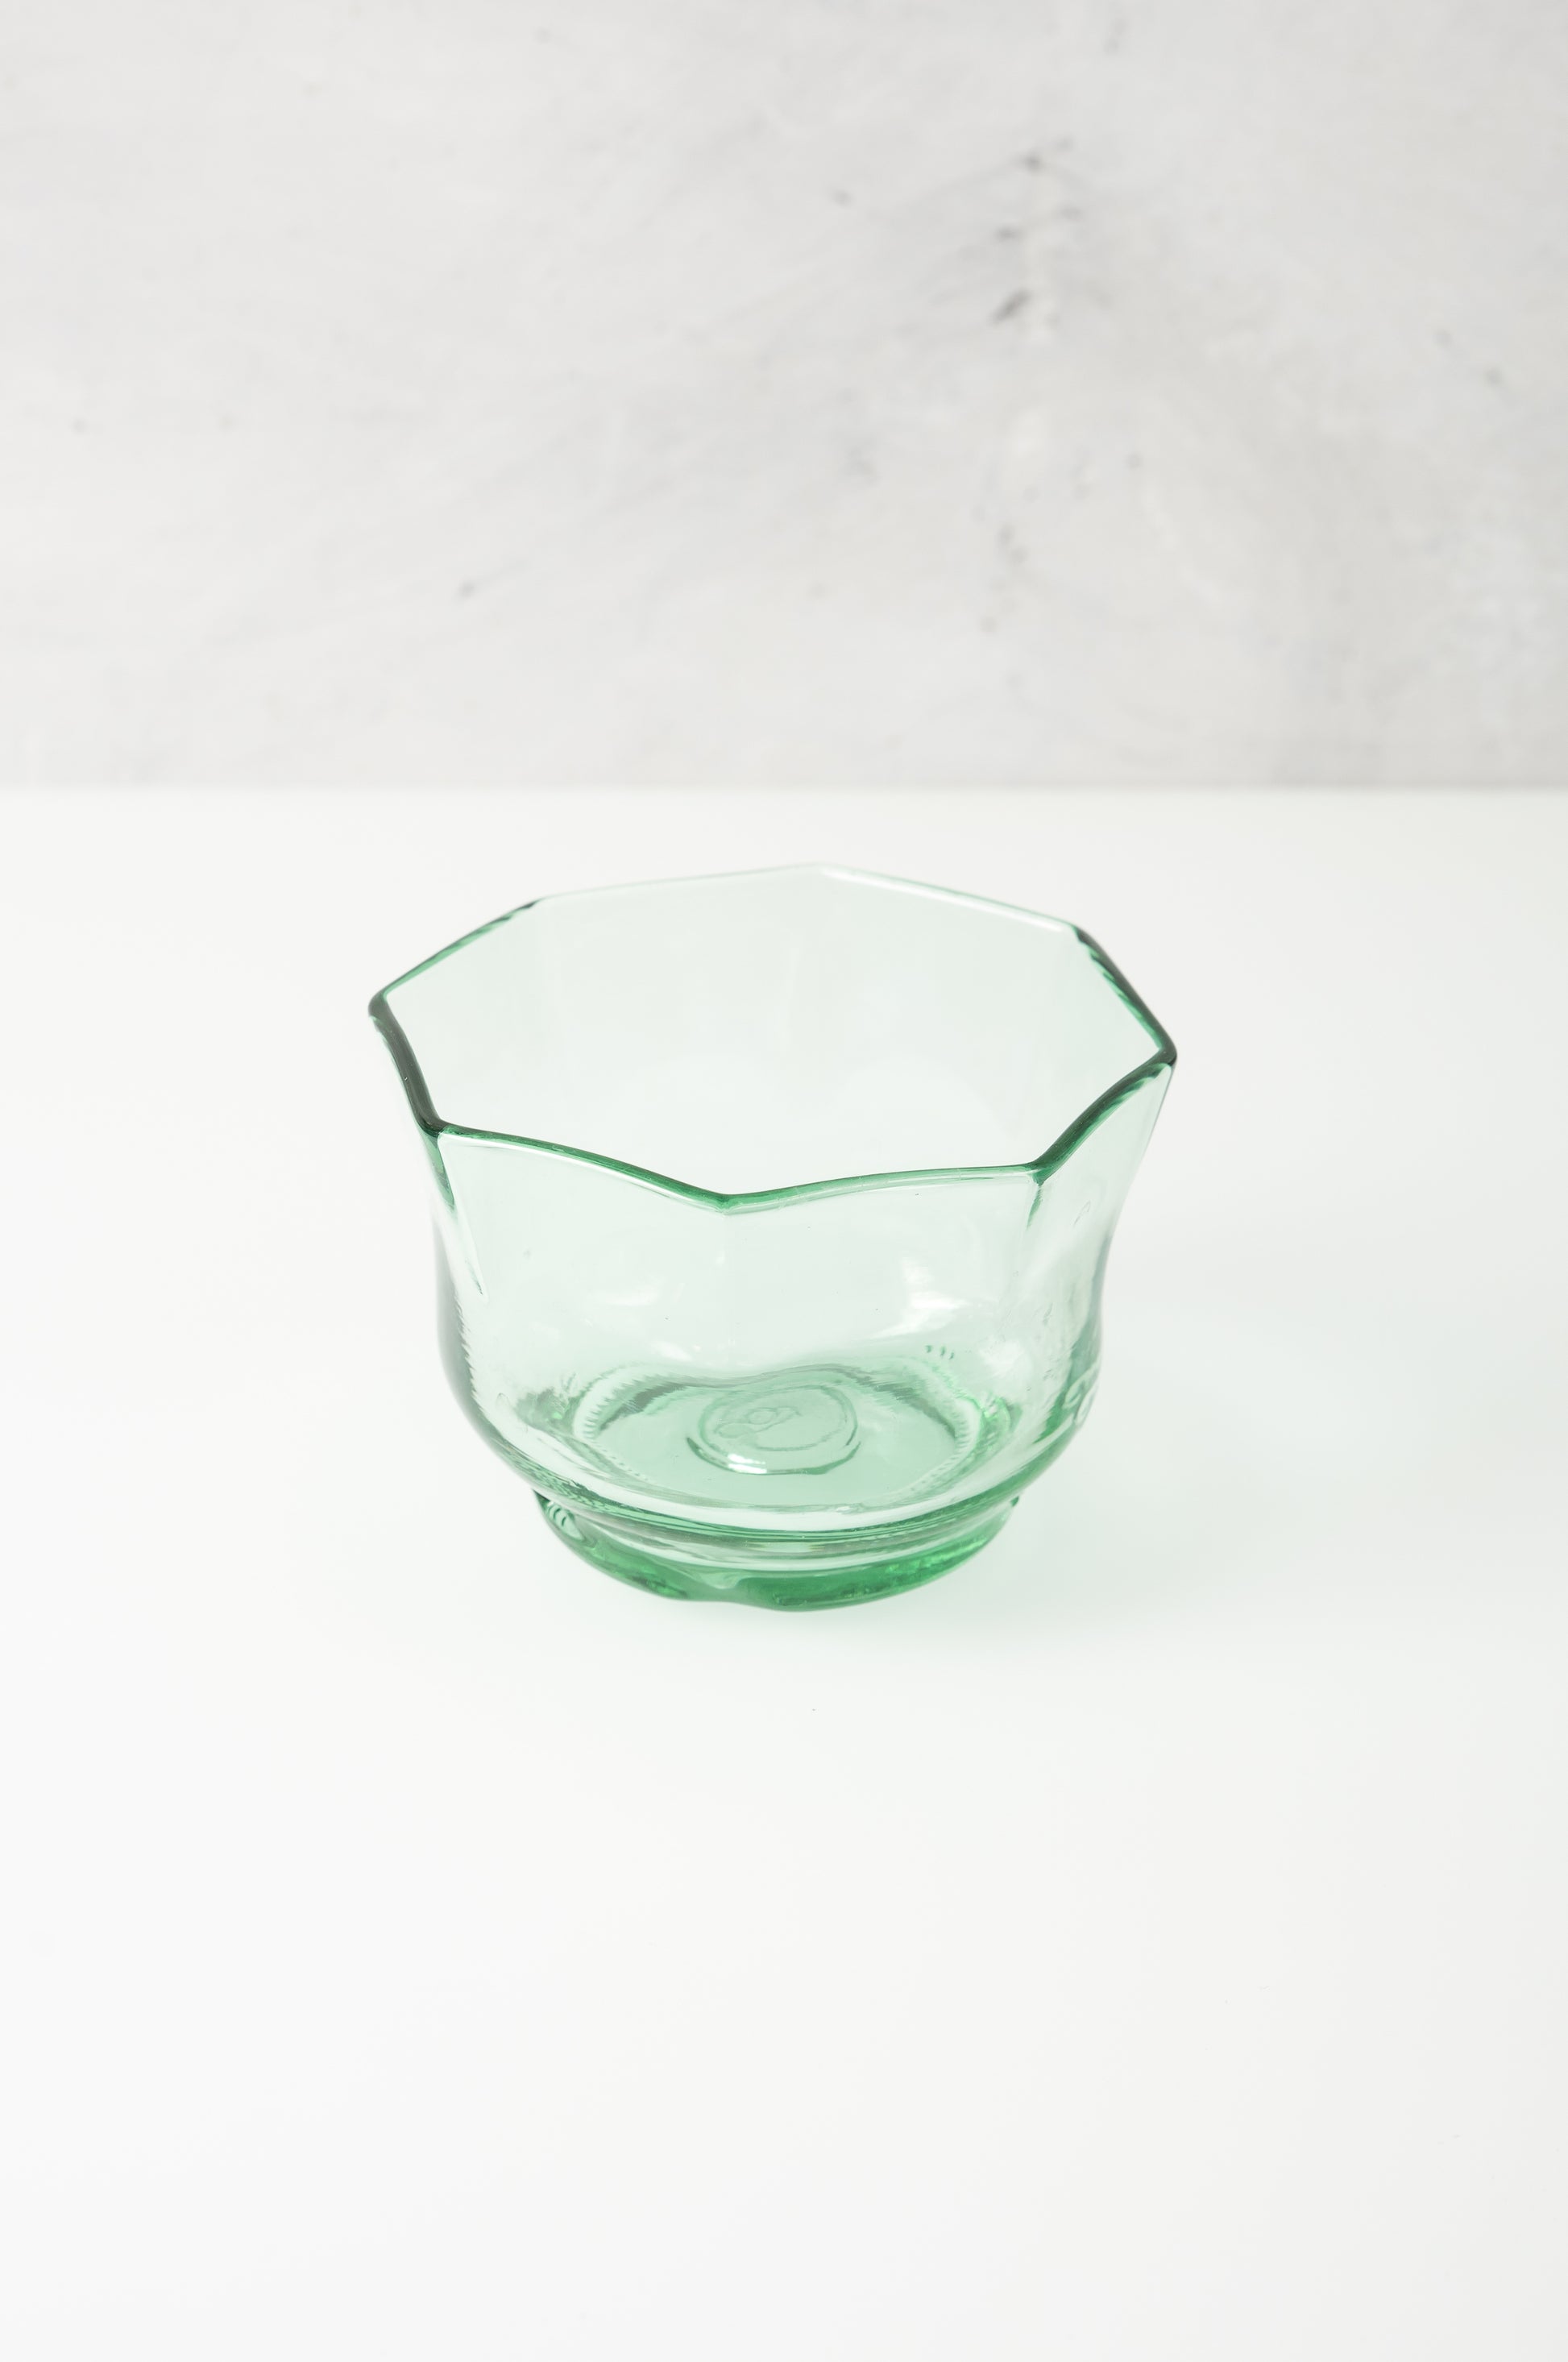 aqua octagonal snack bowl made from recycled glass